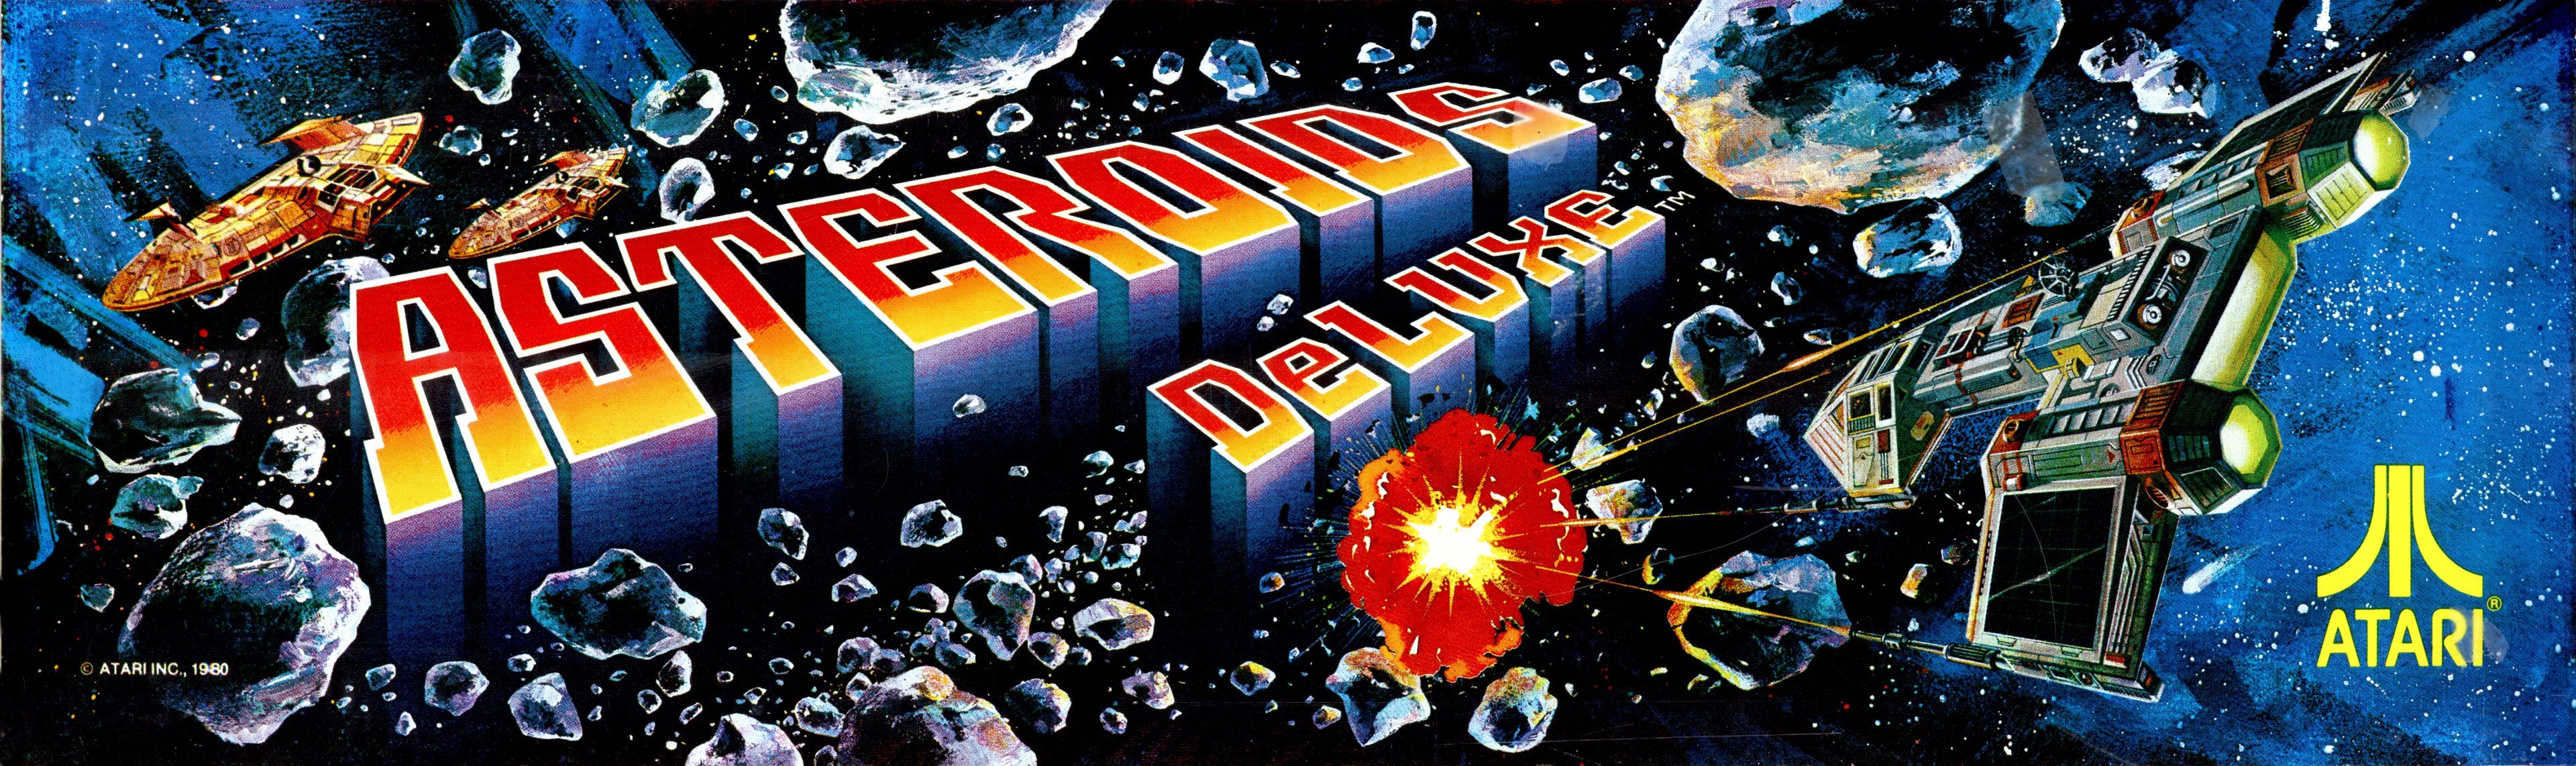 Asteroids Deluxe (Marquee) (Museum RetroGames e. V. CC BY-NC-SA)